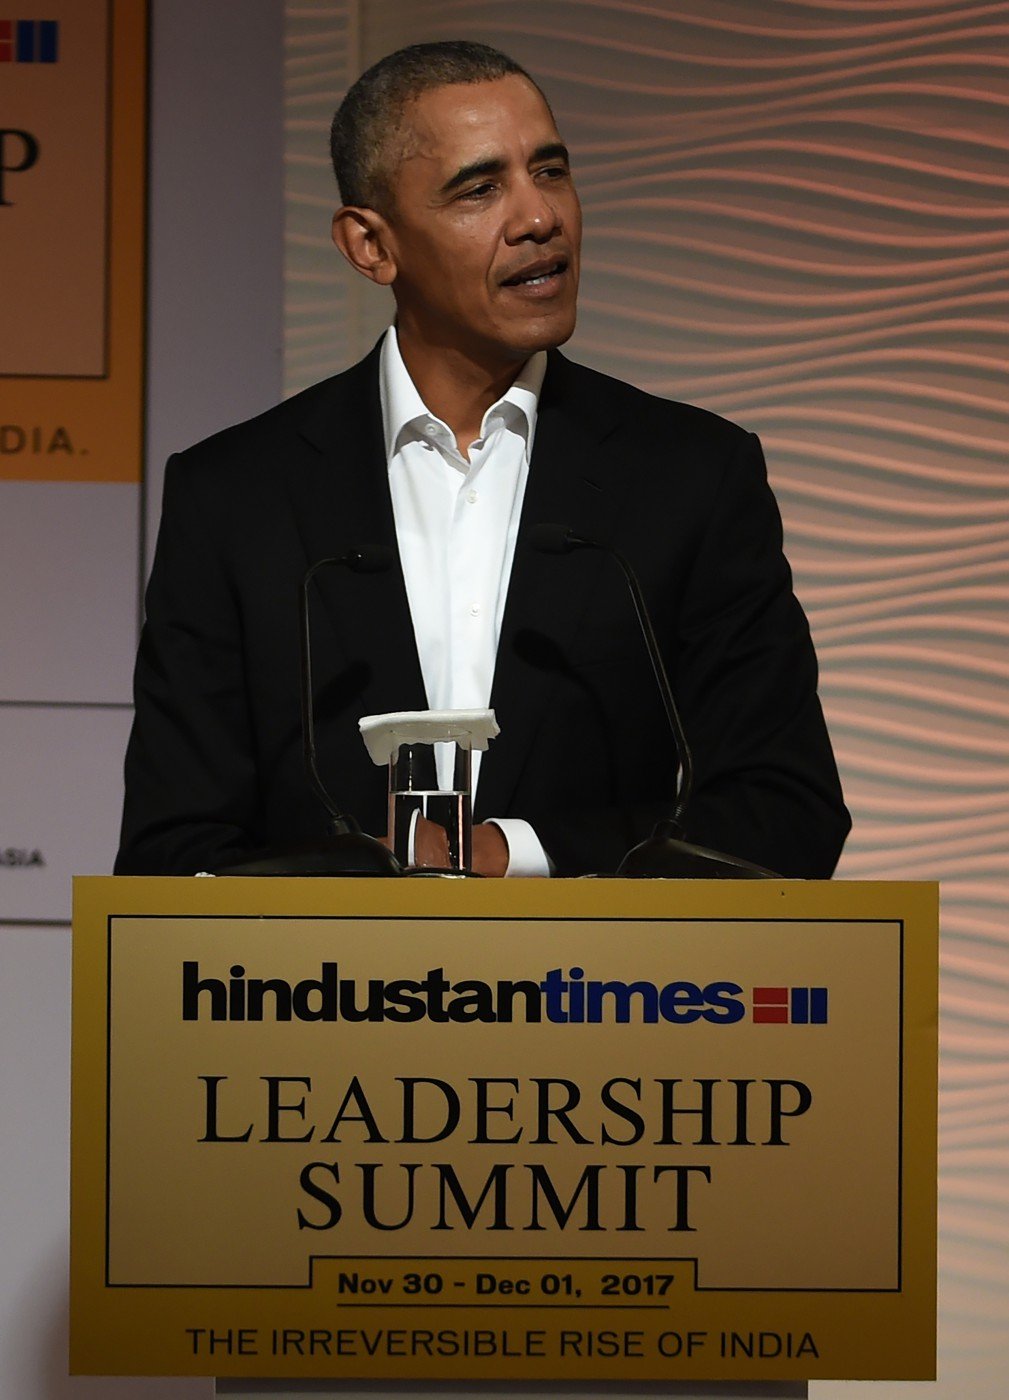 Former US president Barack Obama speaks during his address at the Hindustan Times Leadership Summit in the Indian capital New Delhi on December 1, 2017. Former US president Barack Obama launched a veiled barb at his successor Donald Trump on November 1, saying there is " a pause in American leadership"  on climate change.  / AFP PHOTO / MONEY SHARMA Caption